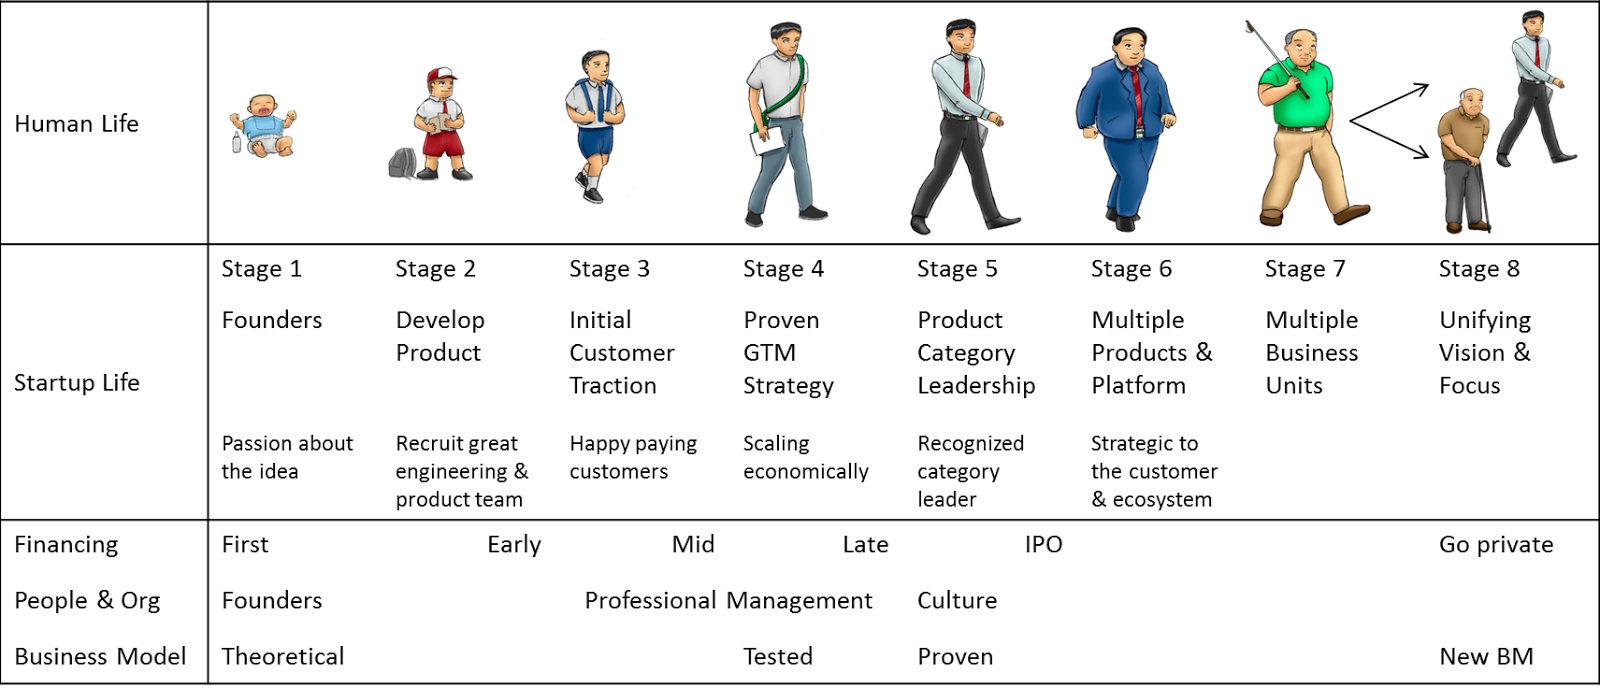 Stages of Life. Ages and Stages of Life. Different Stages of Life. Stages of Human Life.